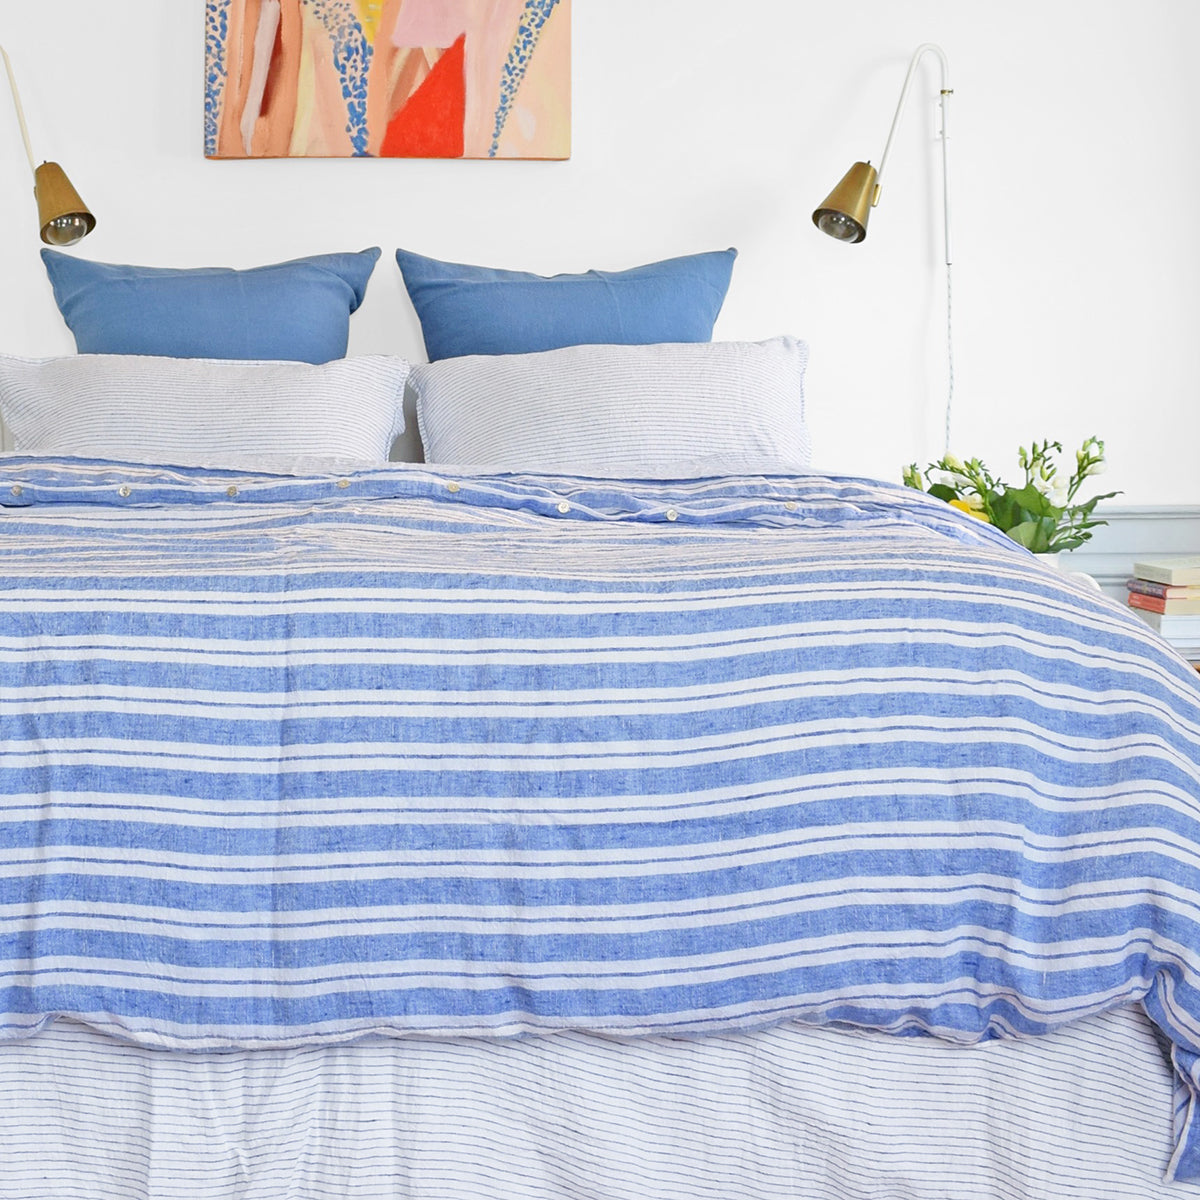 A Linge Particulier Linen Duvet in Large Blue Stripes gives a blue and white stripe color to this duvet for a colorful patterned and printed linen bedding look from Collyer's Mansion